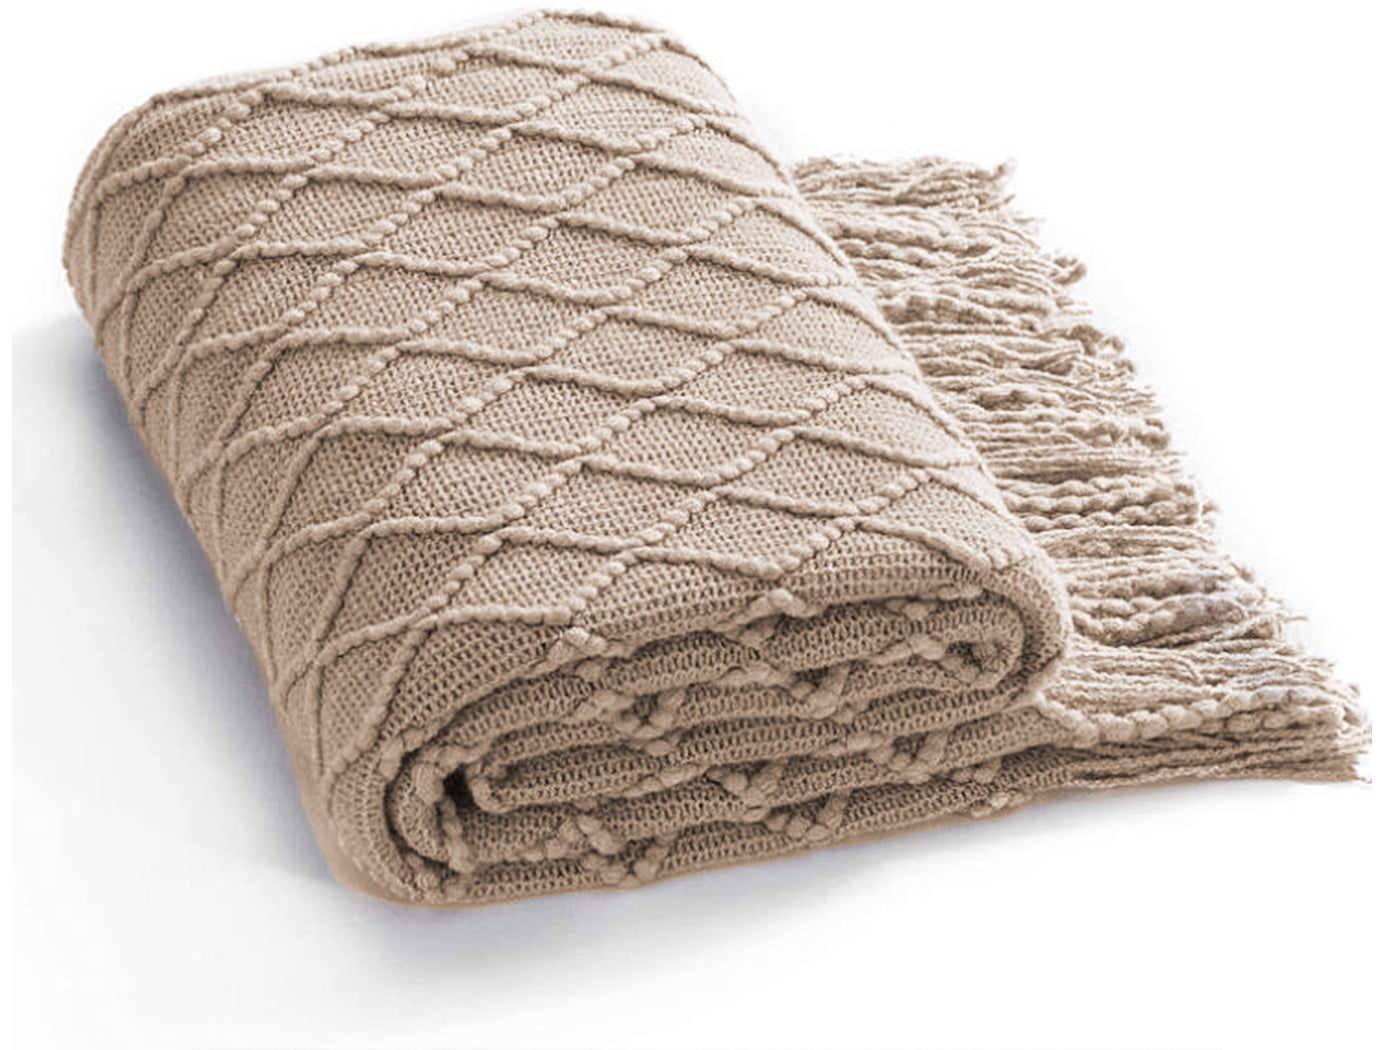 Dodolly Diamond Textured Knitted Solid Sofa Blankets with Tassel Cozy Soft Lightweight Travel Blanket for All Seasons, Khaki, 500g